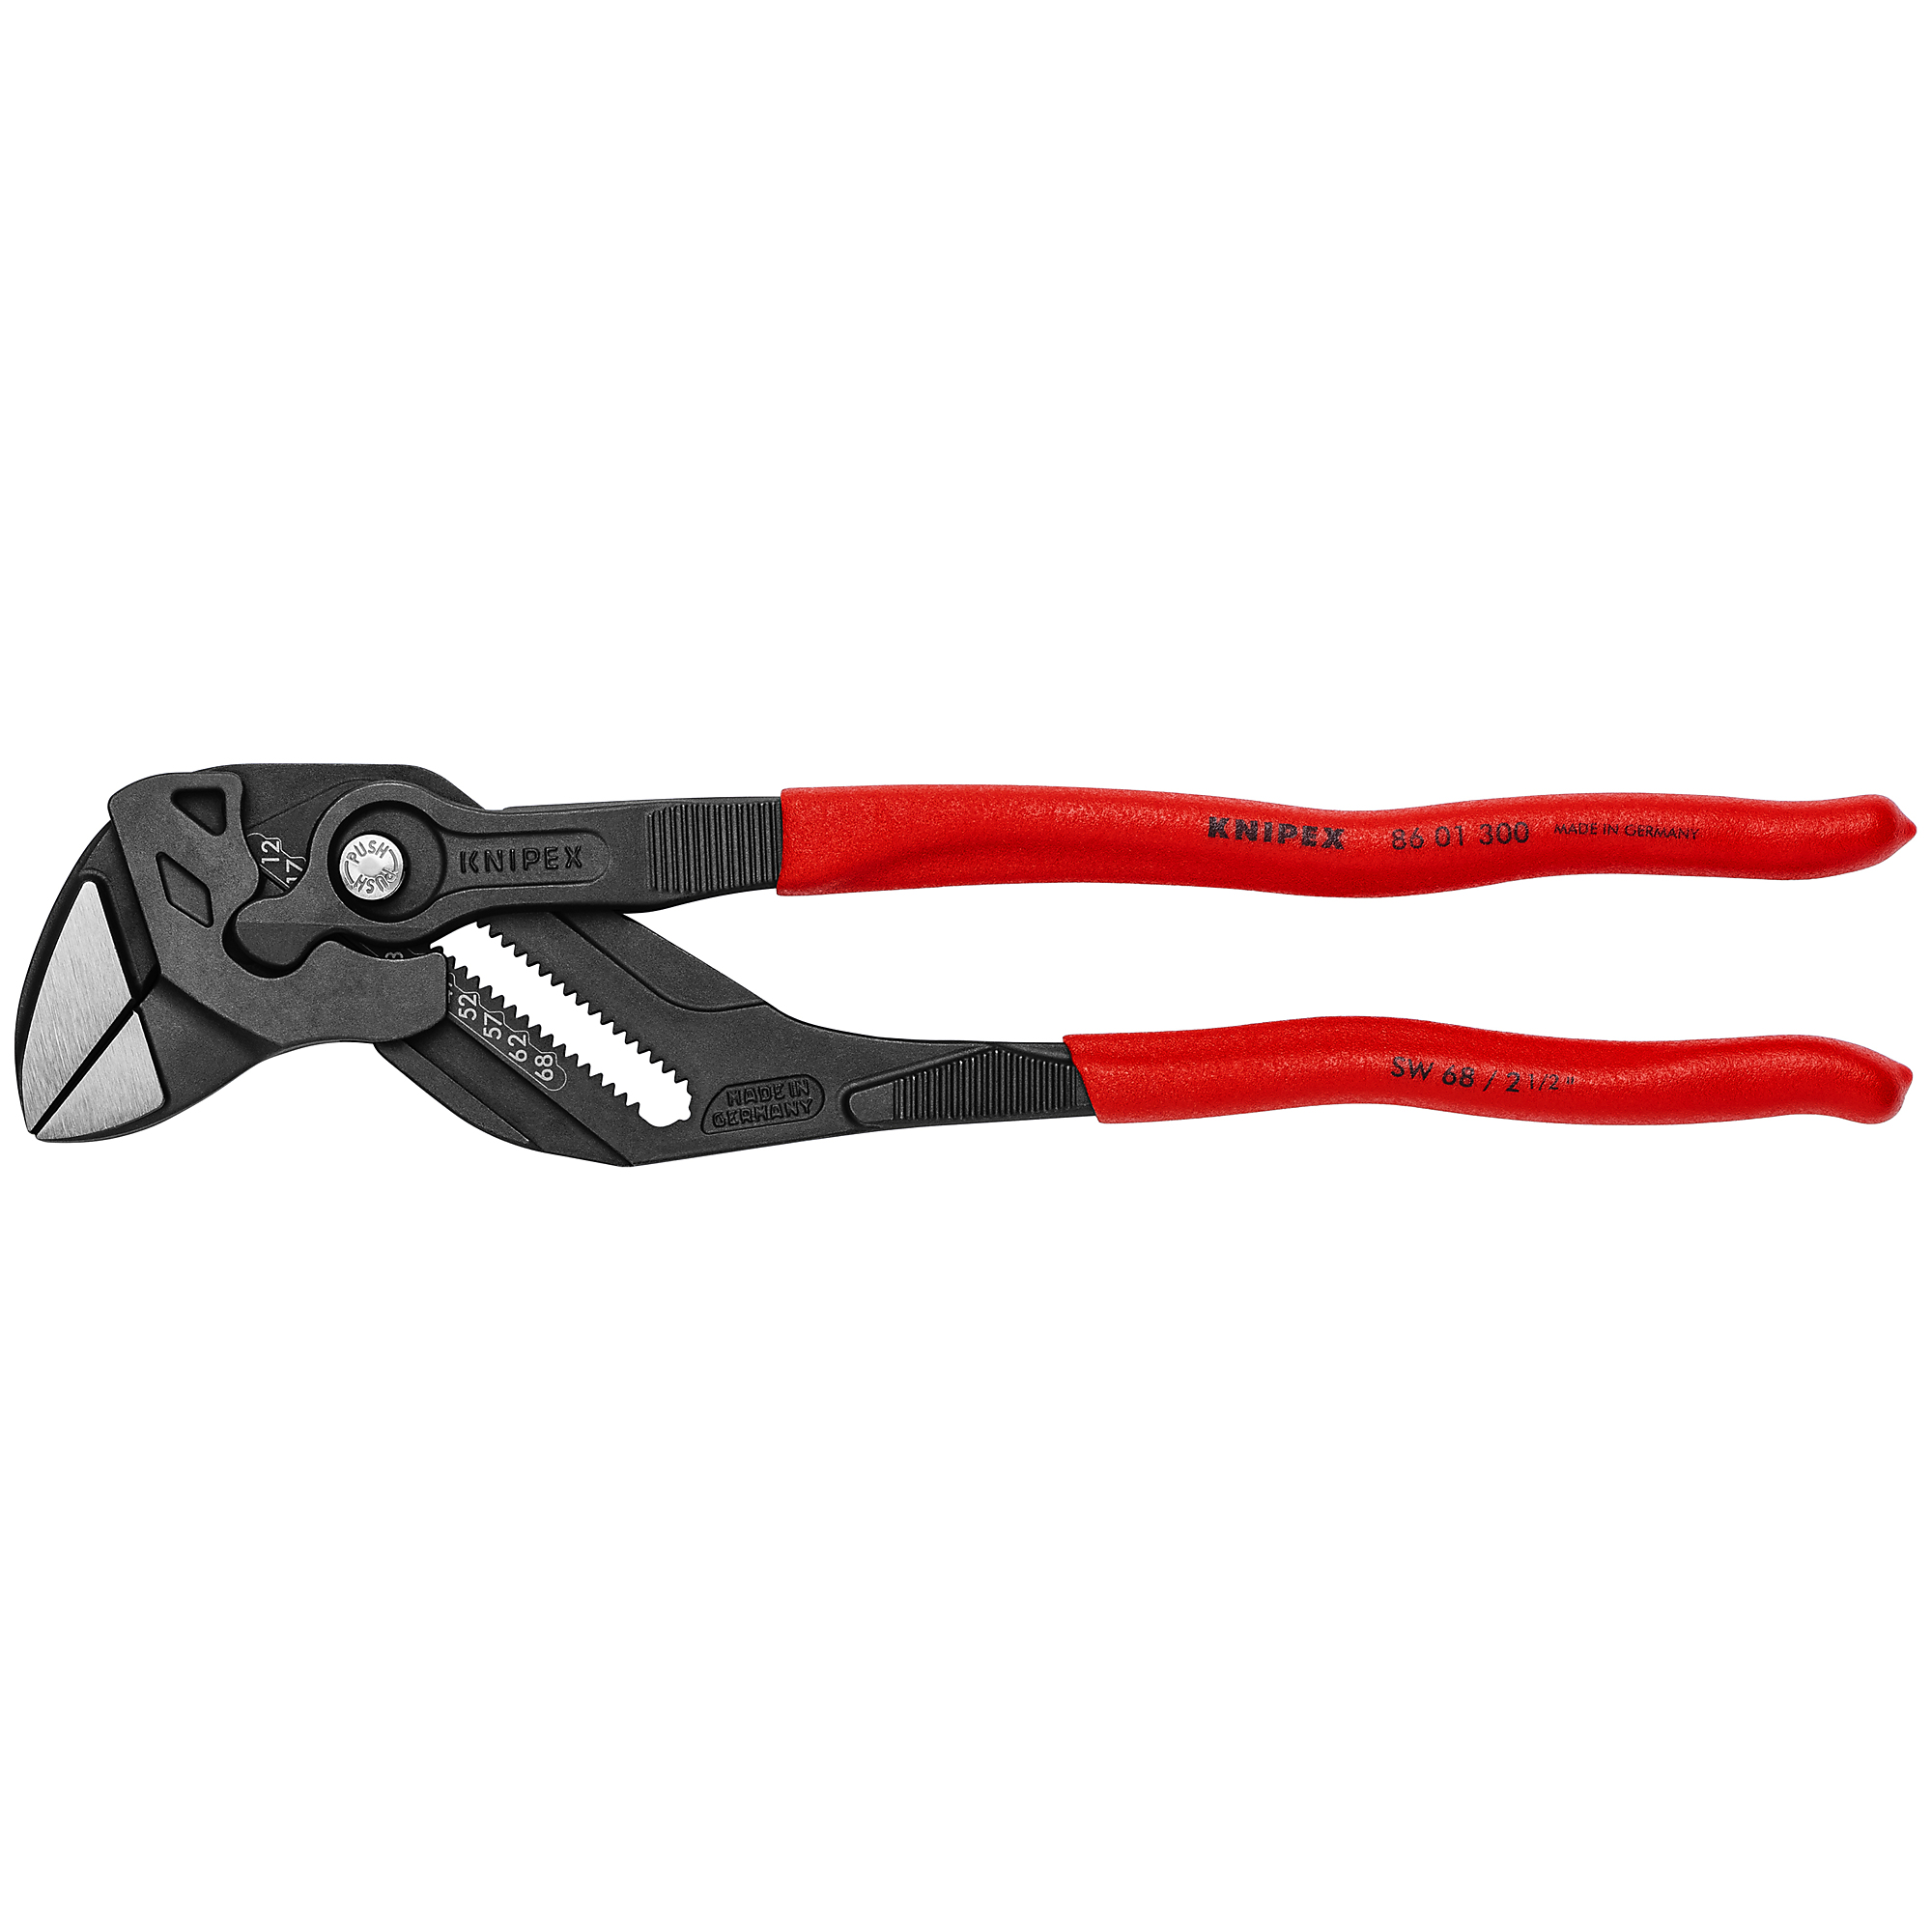 KNIPEX, Pliers Wrench, Non-slip plastic, Bulk, 12Inch, Pieces (qty.) 1 Material Steel, Jaw Capacity 2.5 in, Model 86 01 300